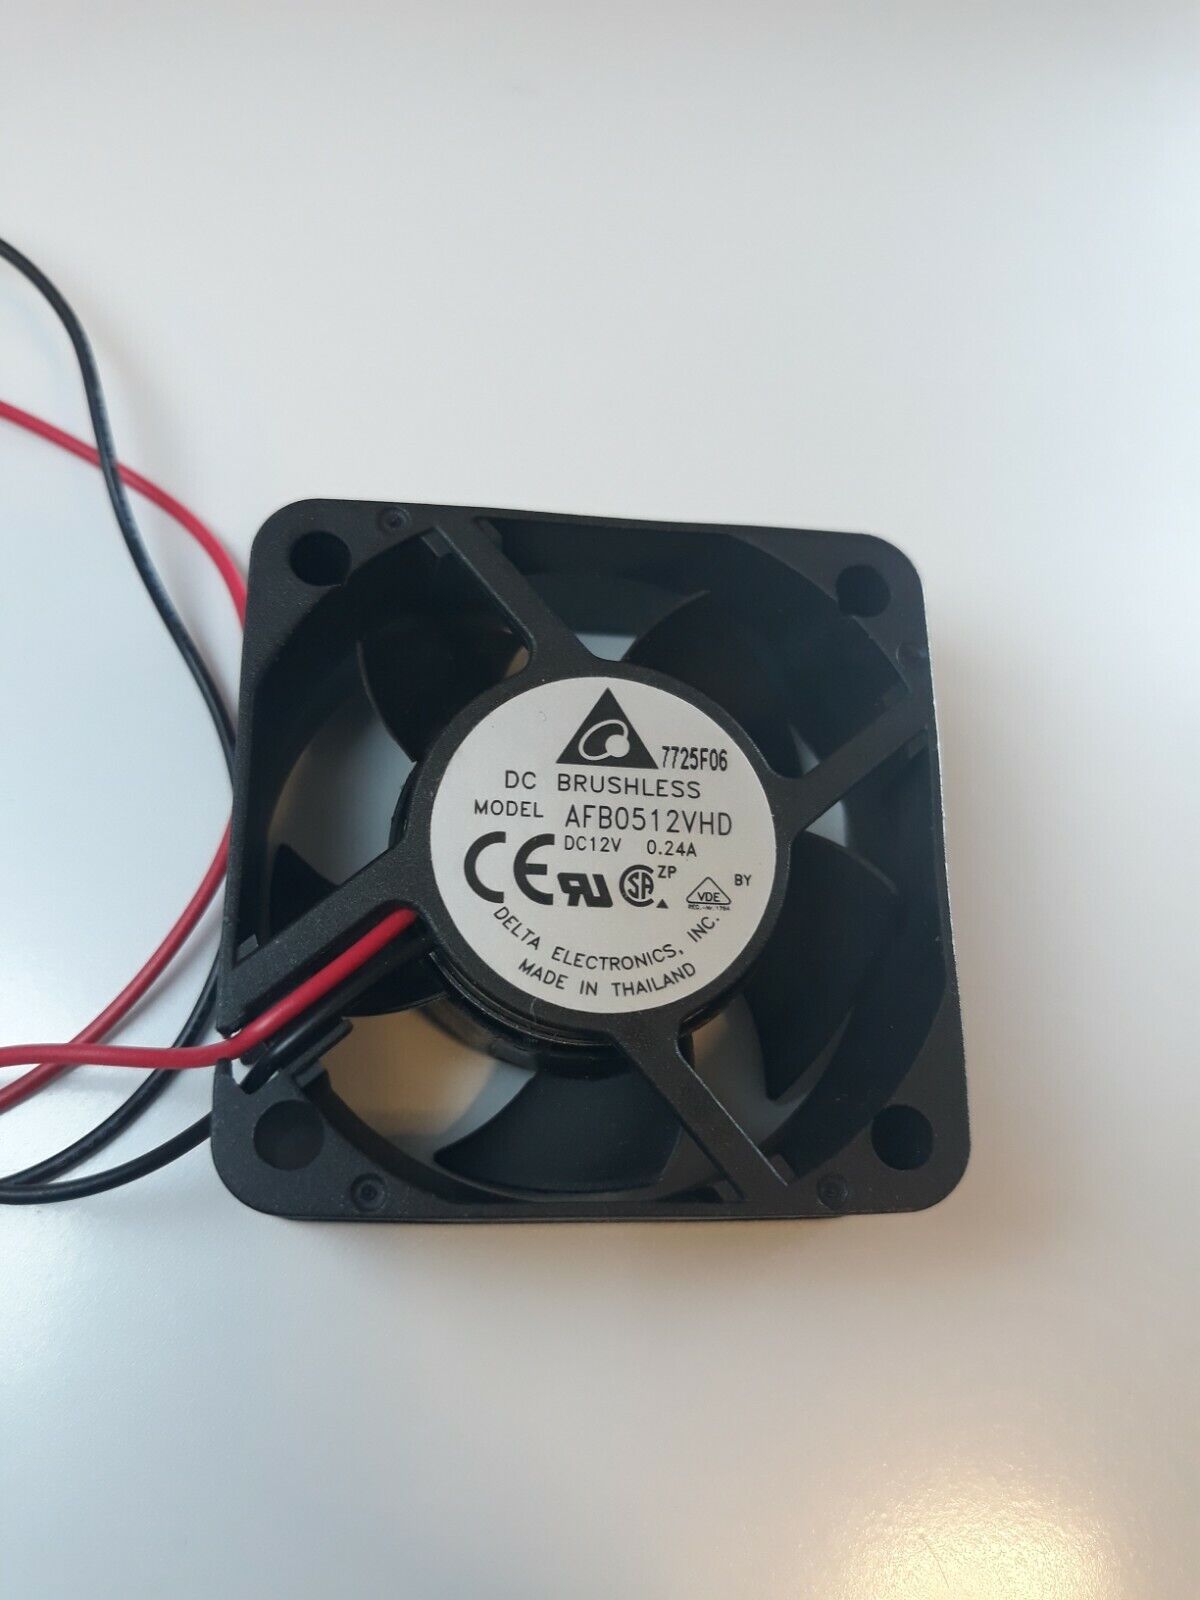 (1)Delta AFB0512VHD 7000 RPM 12v DC 50mm x 20mm 2-Wire PC/CPU/Server Cooling Fan